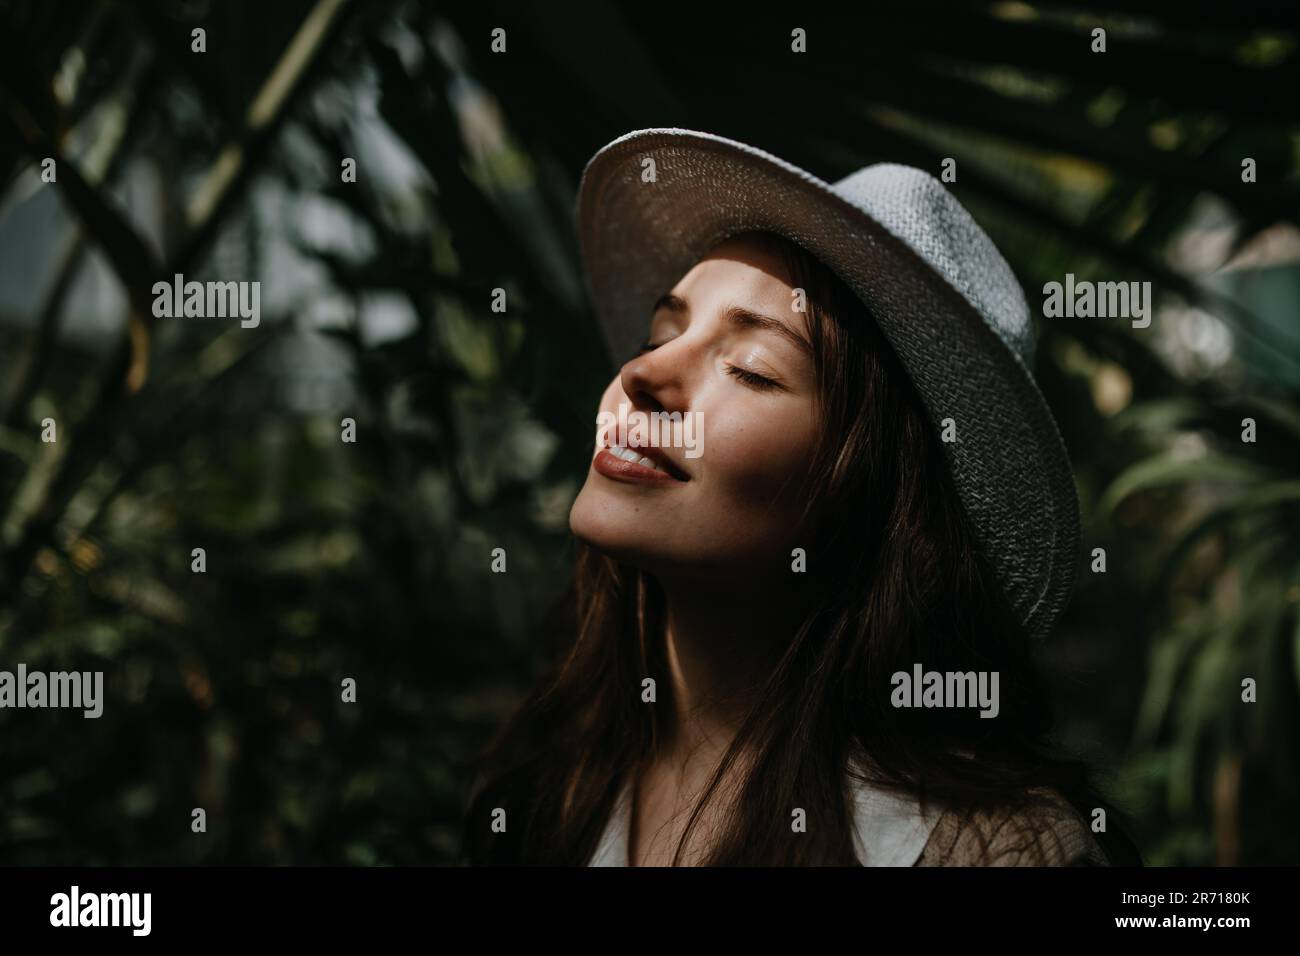 Portrait of young woman with hat in botanical garden. Stock Photo